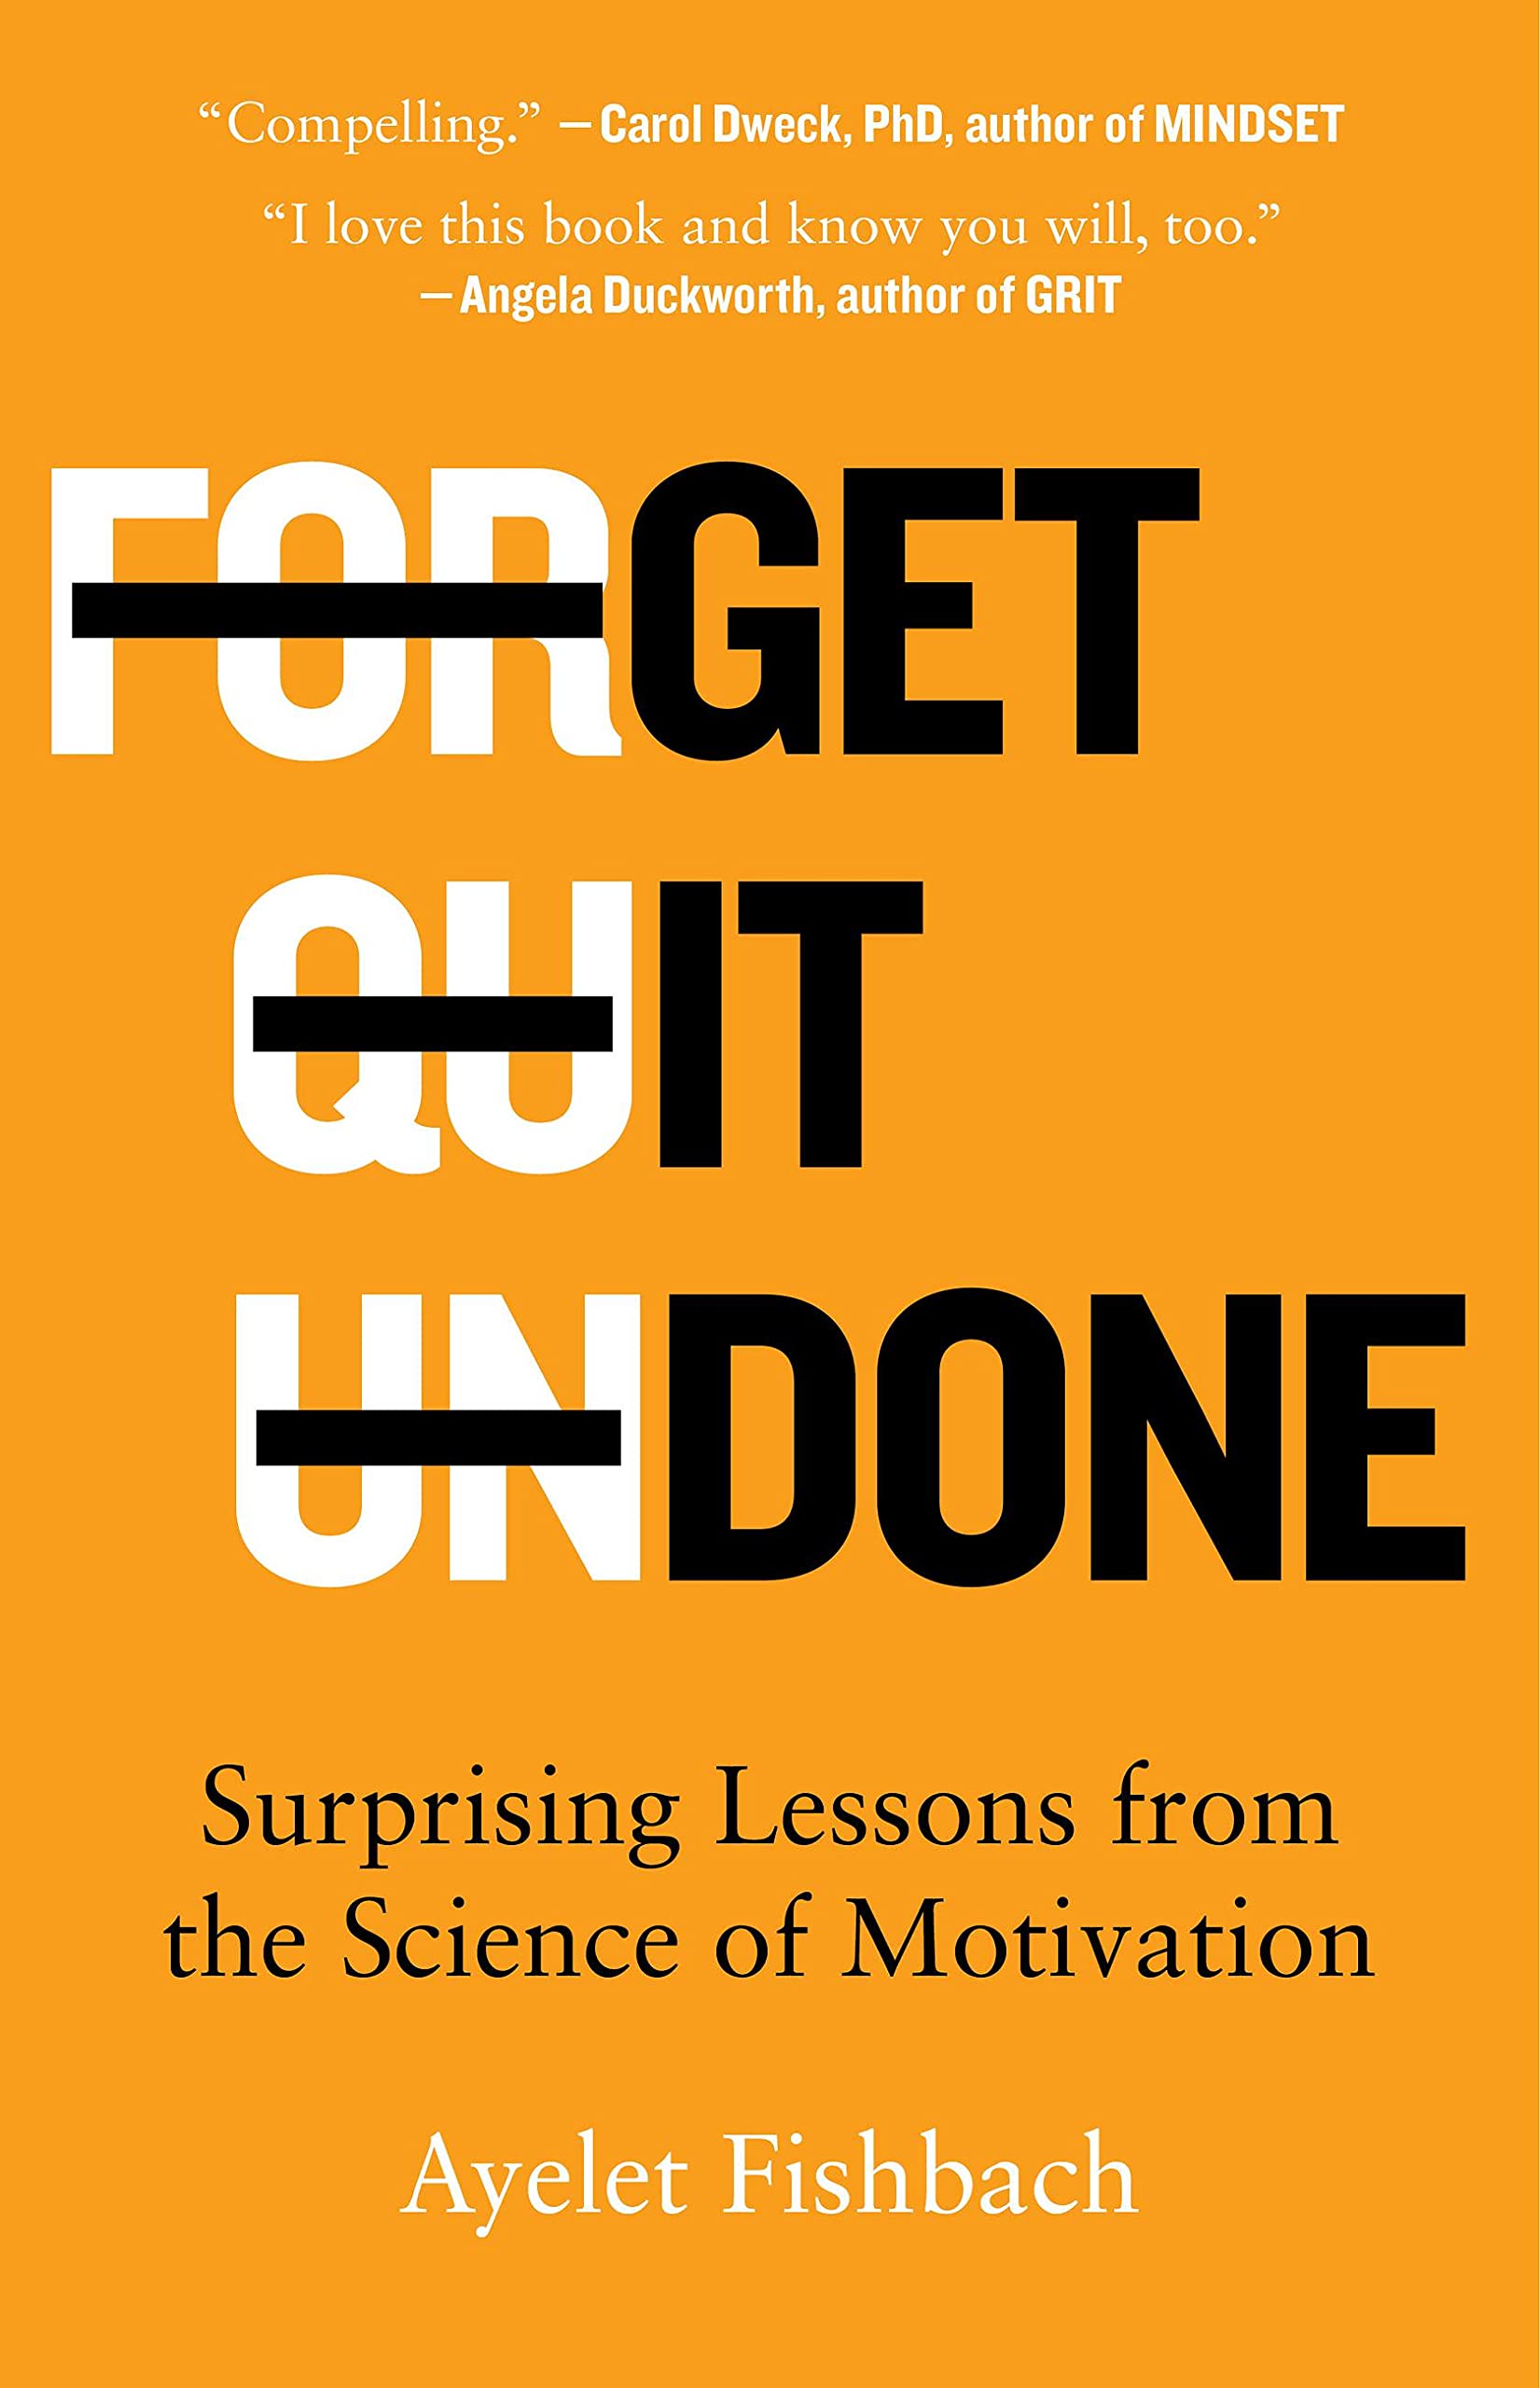 Ayelet Fishbach on Getting It Done